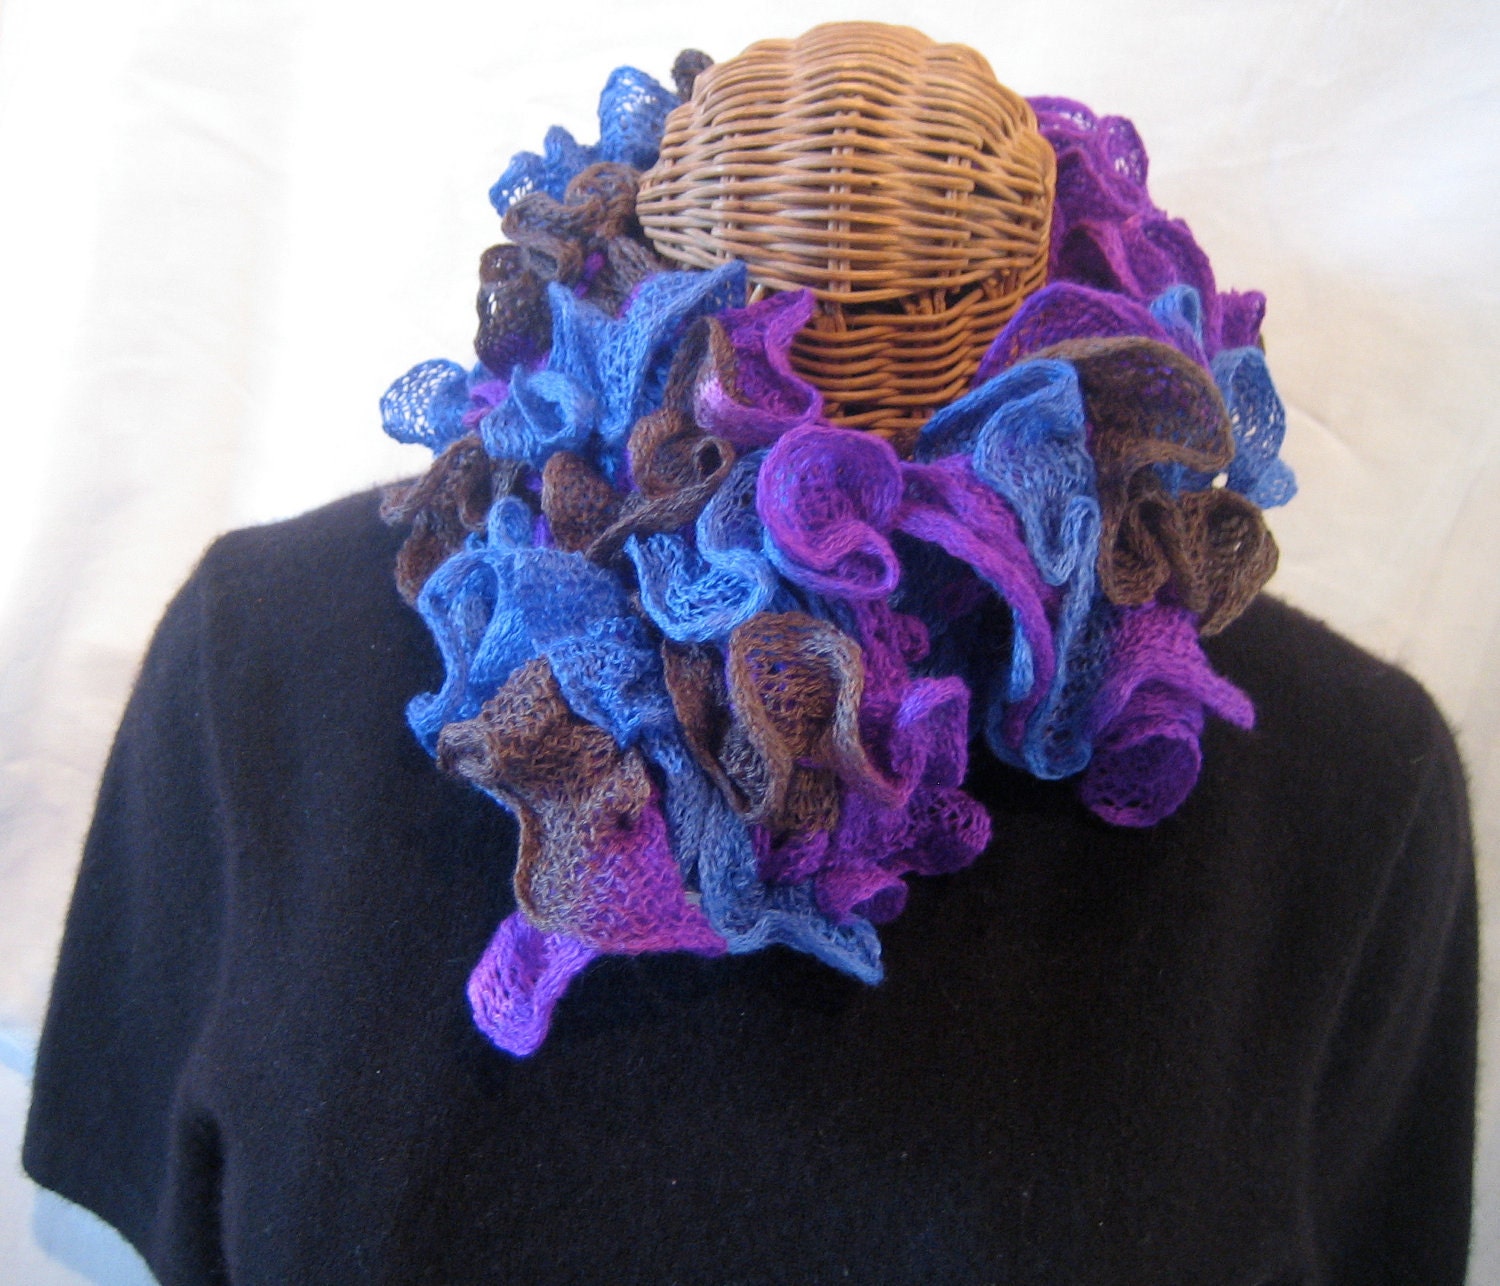 Reserved for sweetpetphotoshop: Hand Knit Women's frilly ruffle purple blue brown neck scarf accessory winter fashion